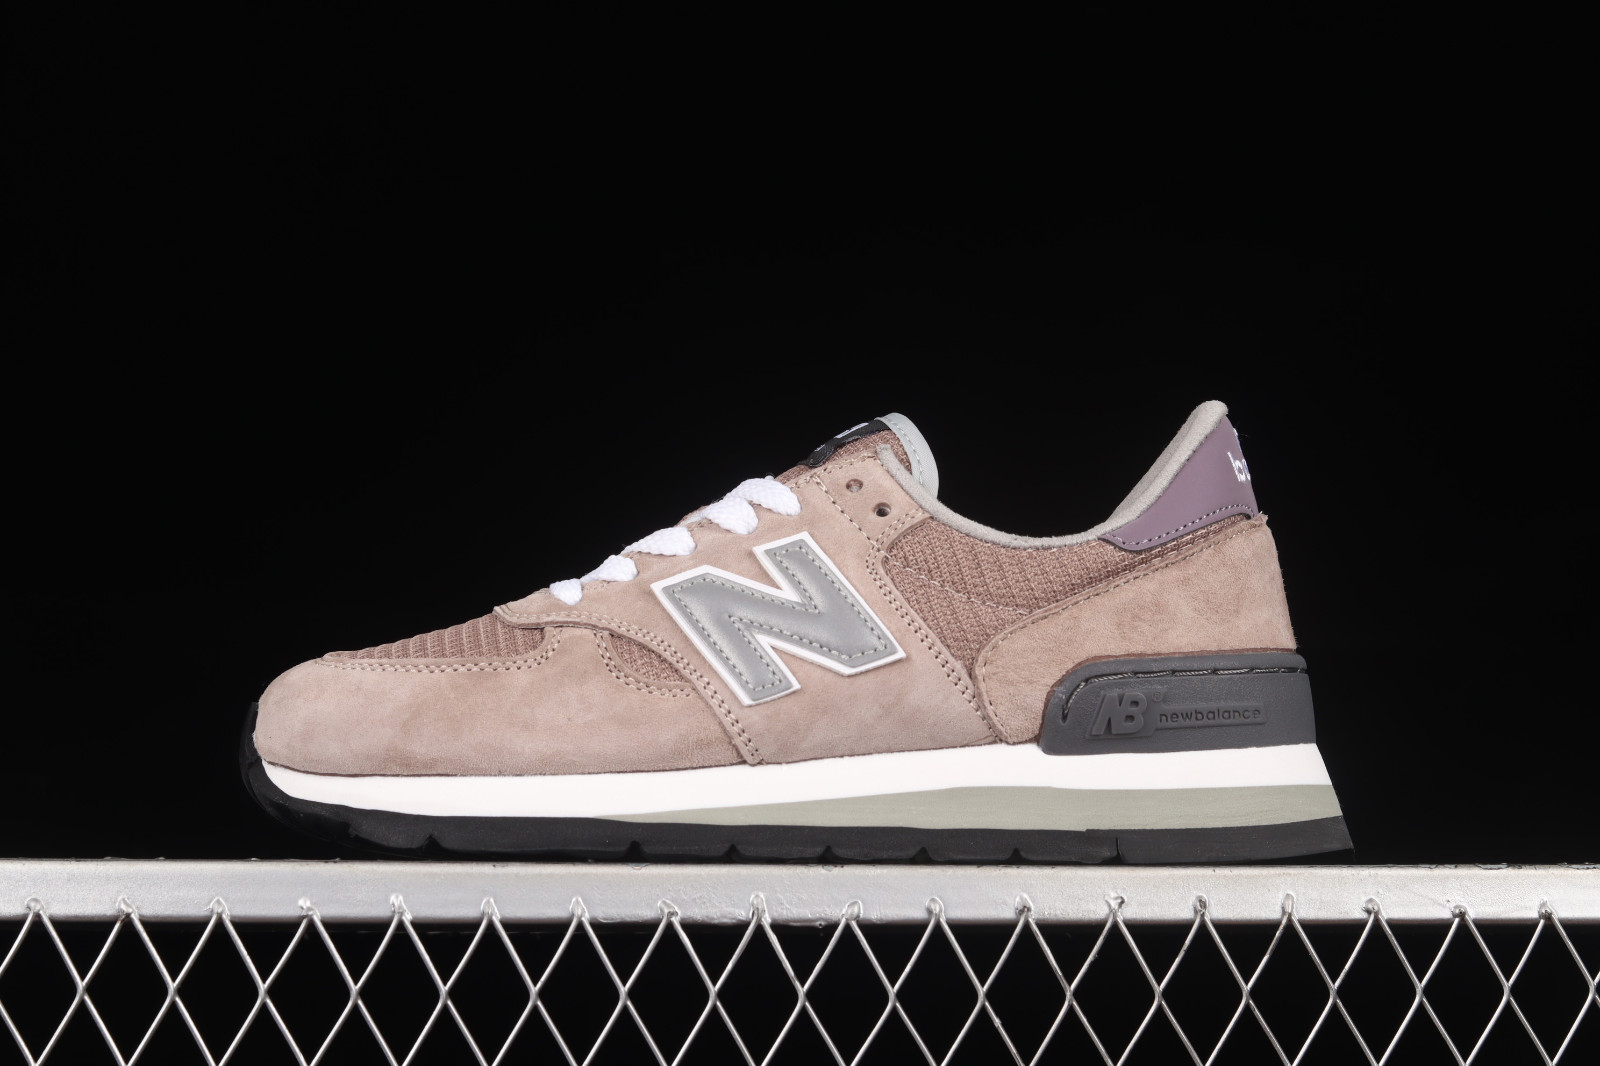 Specificiteit Mus Ontoegankelijk New balance 574 nb574 men lifestyle sneakers shoes new brown blue ml574ov2  - Kith x New Balance 990v1 Made In USA Dusty Rose Silver Navy M990KT1 -  RvceShops